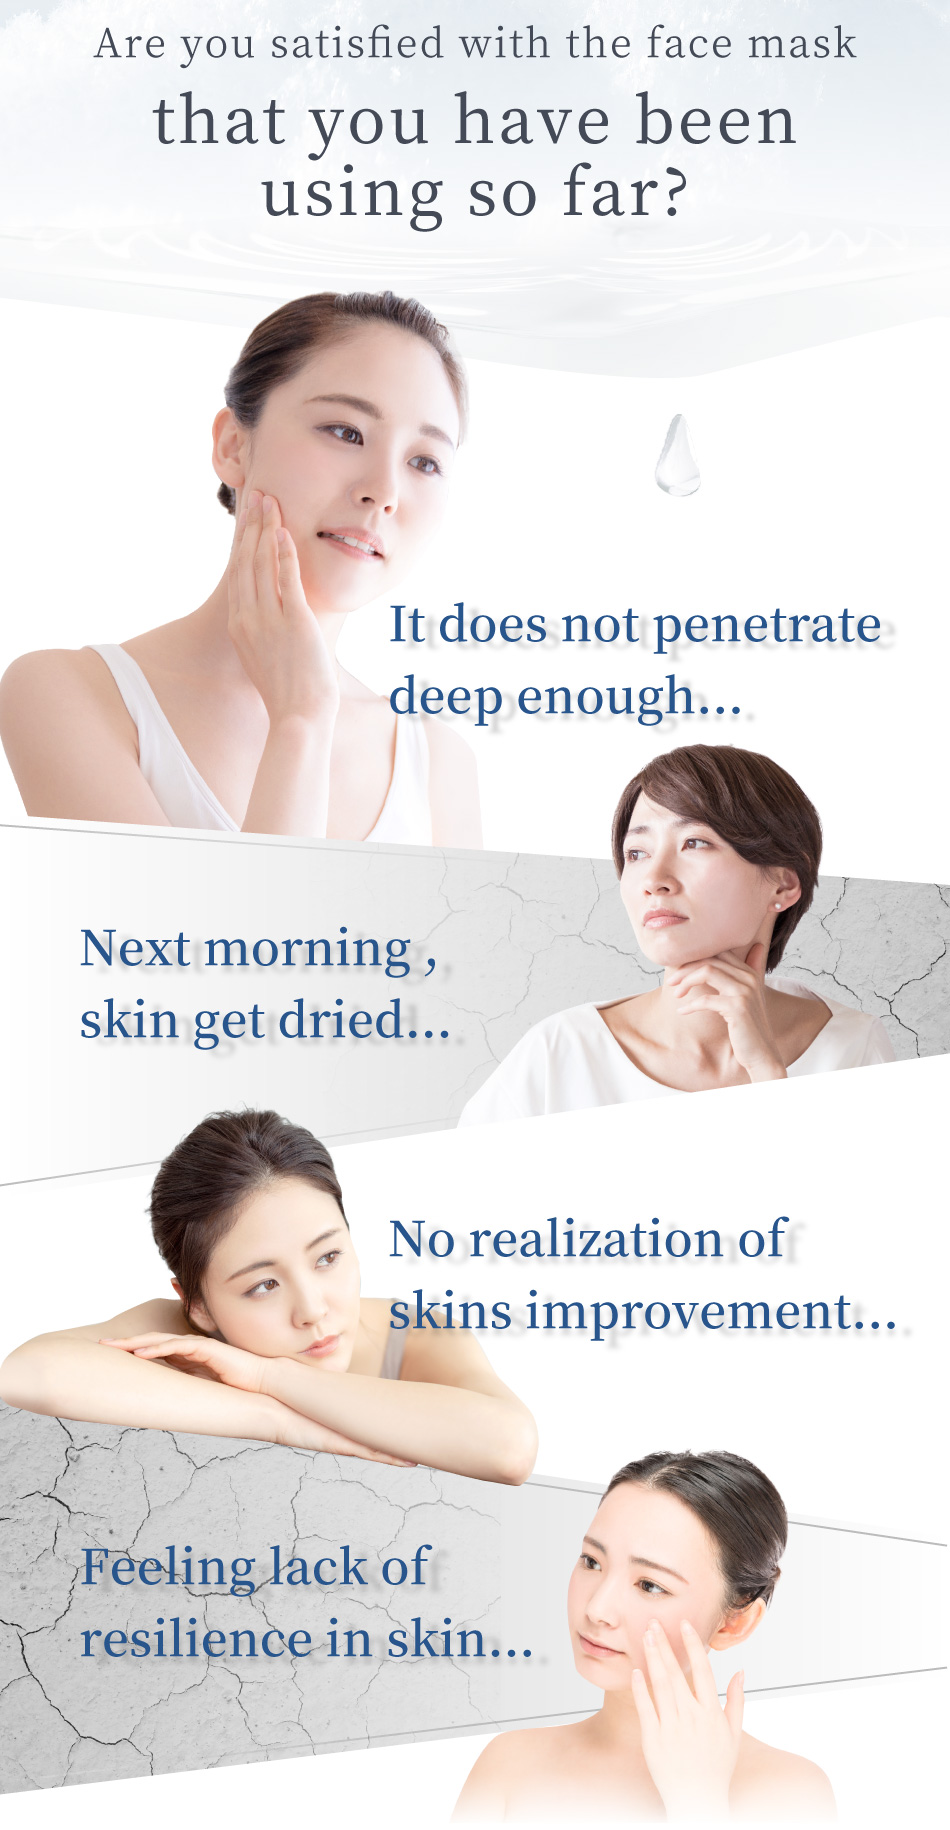 Are you satisfied with the face mask that you have been using so far? It does not penetrate deep enough... Next morning , skin get dried... No realization of skins improvement... Feeling lack of resilience in skin...